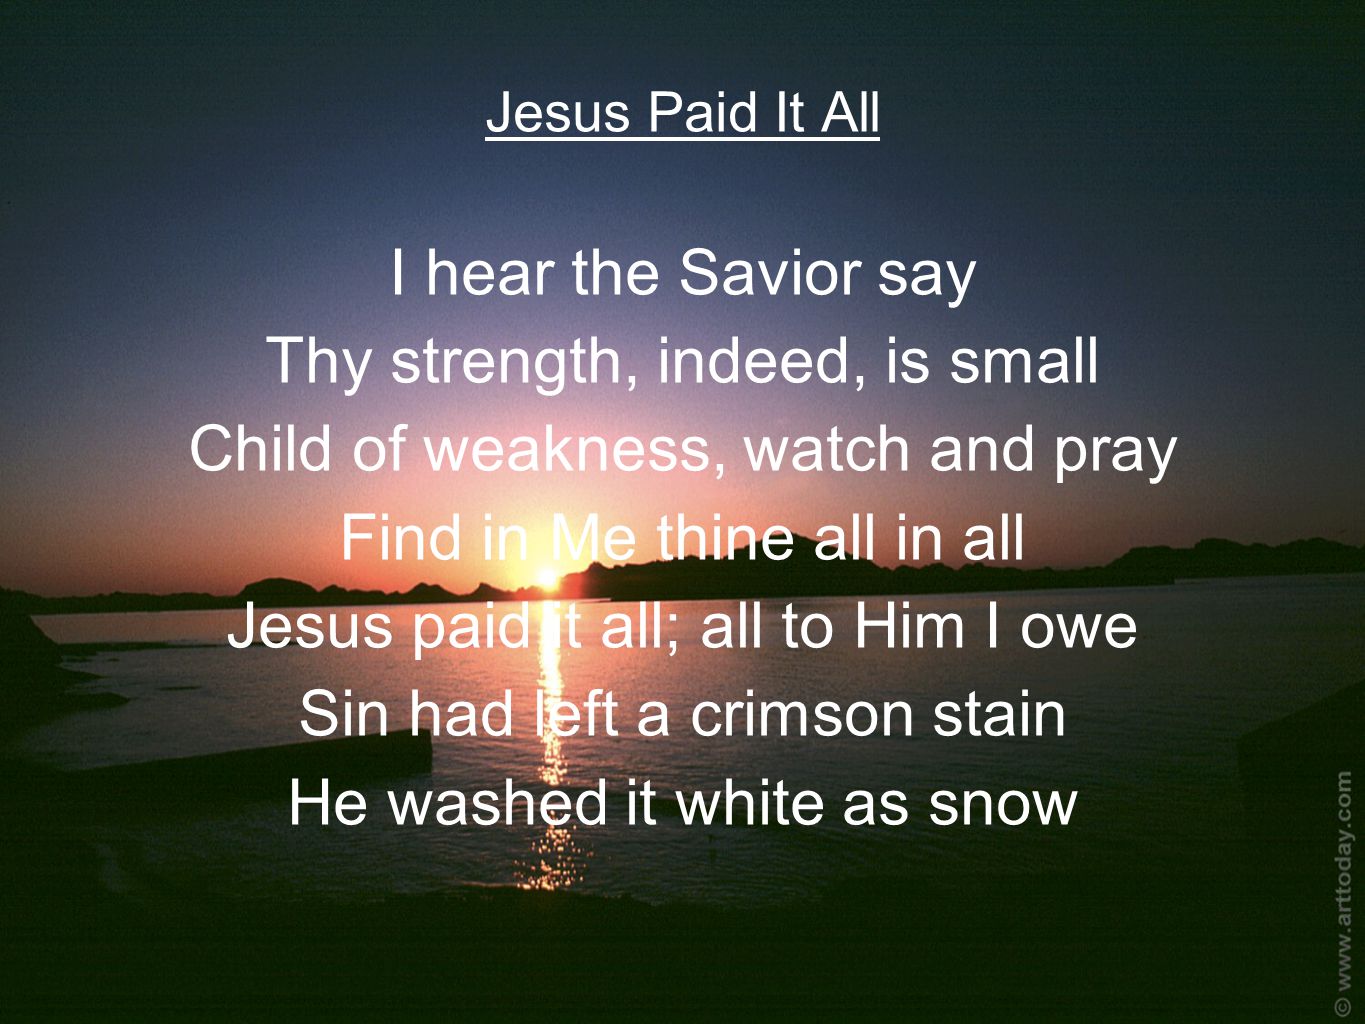 Jesus Paid It All I hear the Savior say Thy strength, indeed, is small Child of weakness, watch and pray Find in Me thine all in all Jesus paid it all; all to Him I owe Sin had left a crimson stain He washed it white as snow